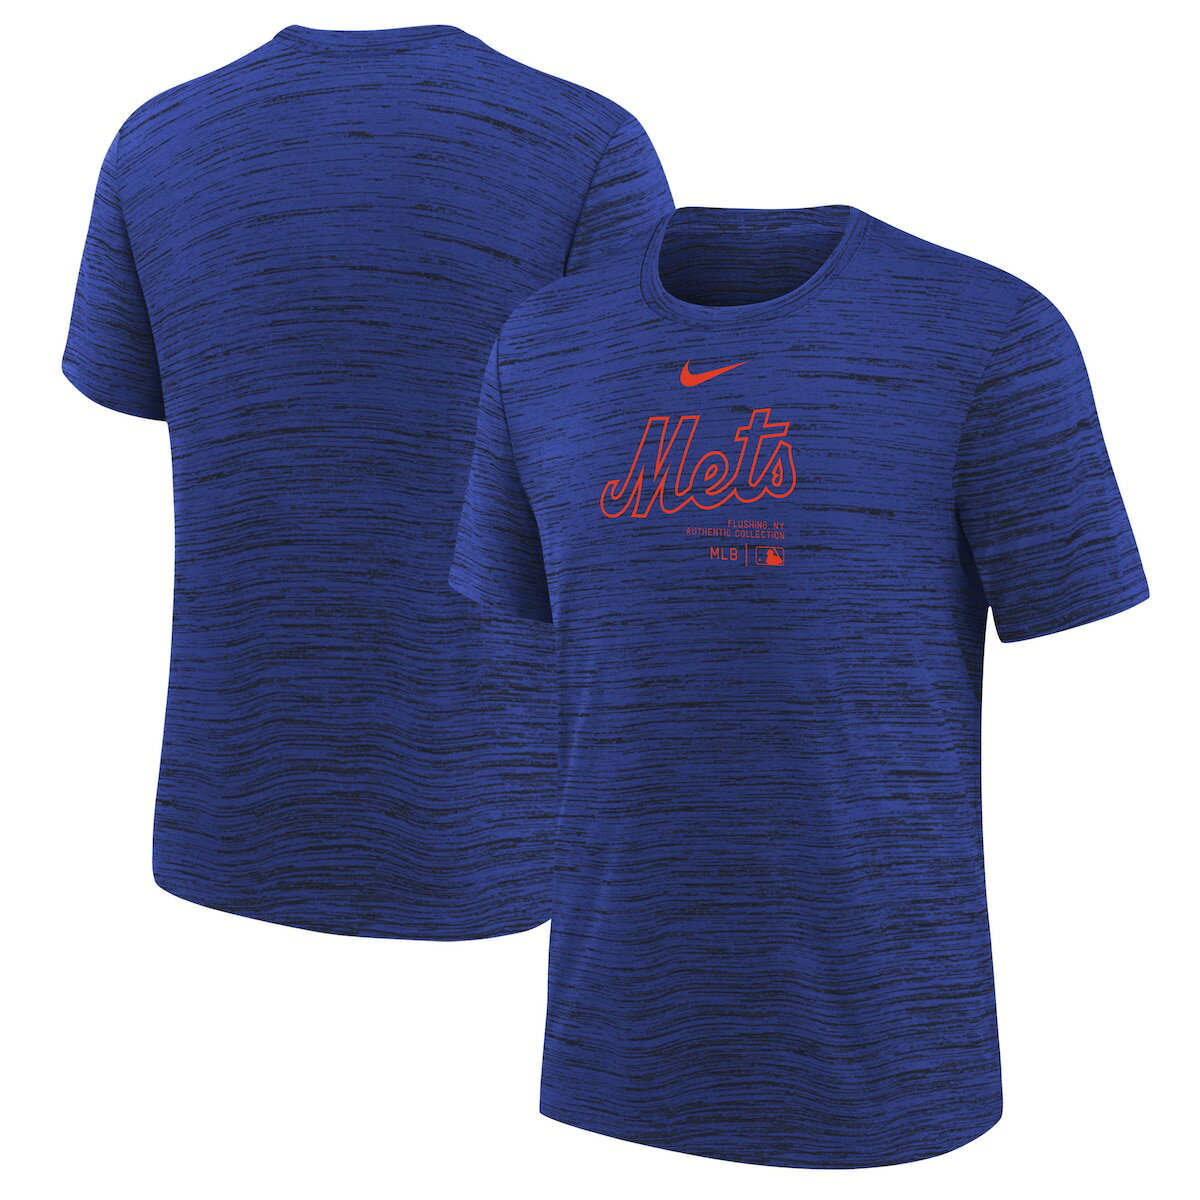 MLB bc TVc Nike iCL LbY C (YTH AC PRACTICE GRAPHIC TEE SS)